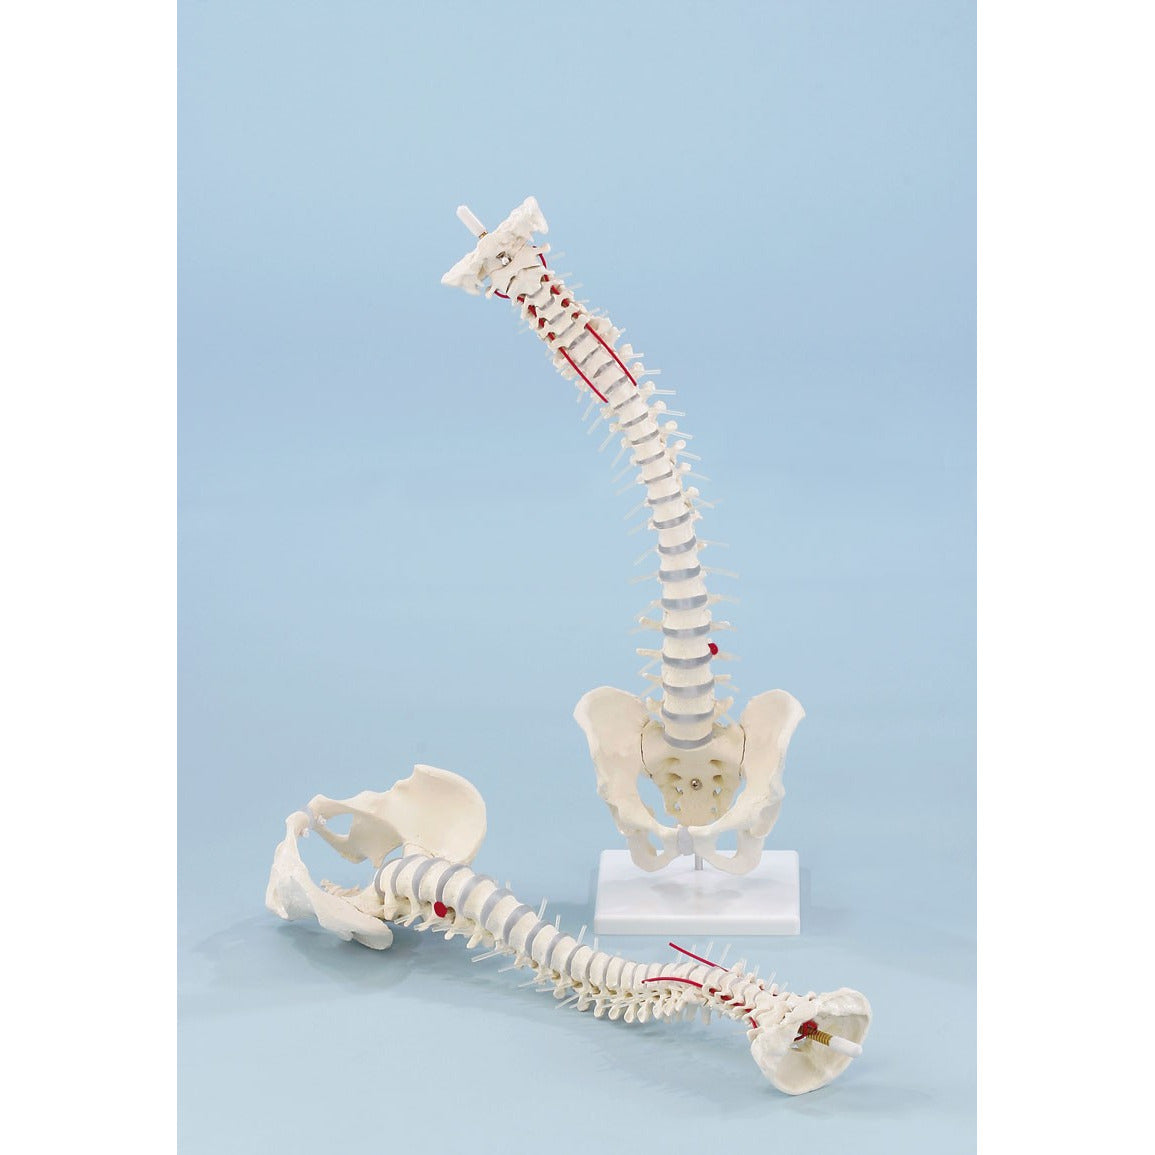 Standard Spine with Prolapse, Pelvis and Stand